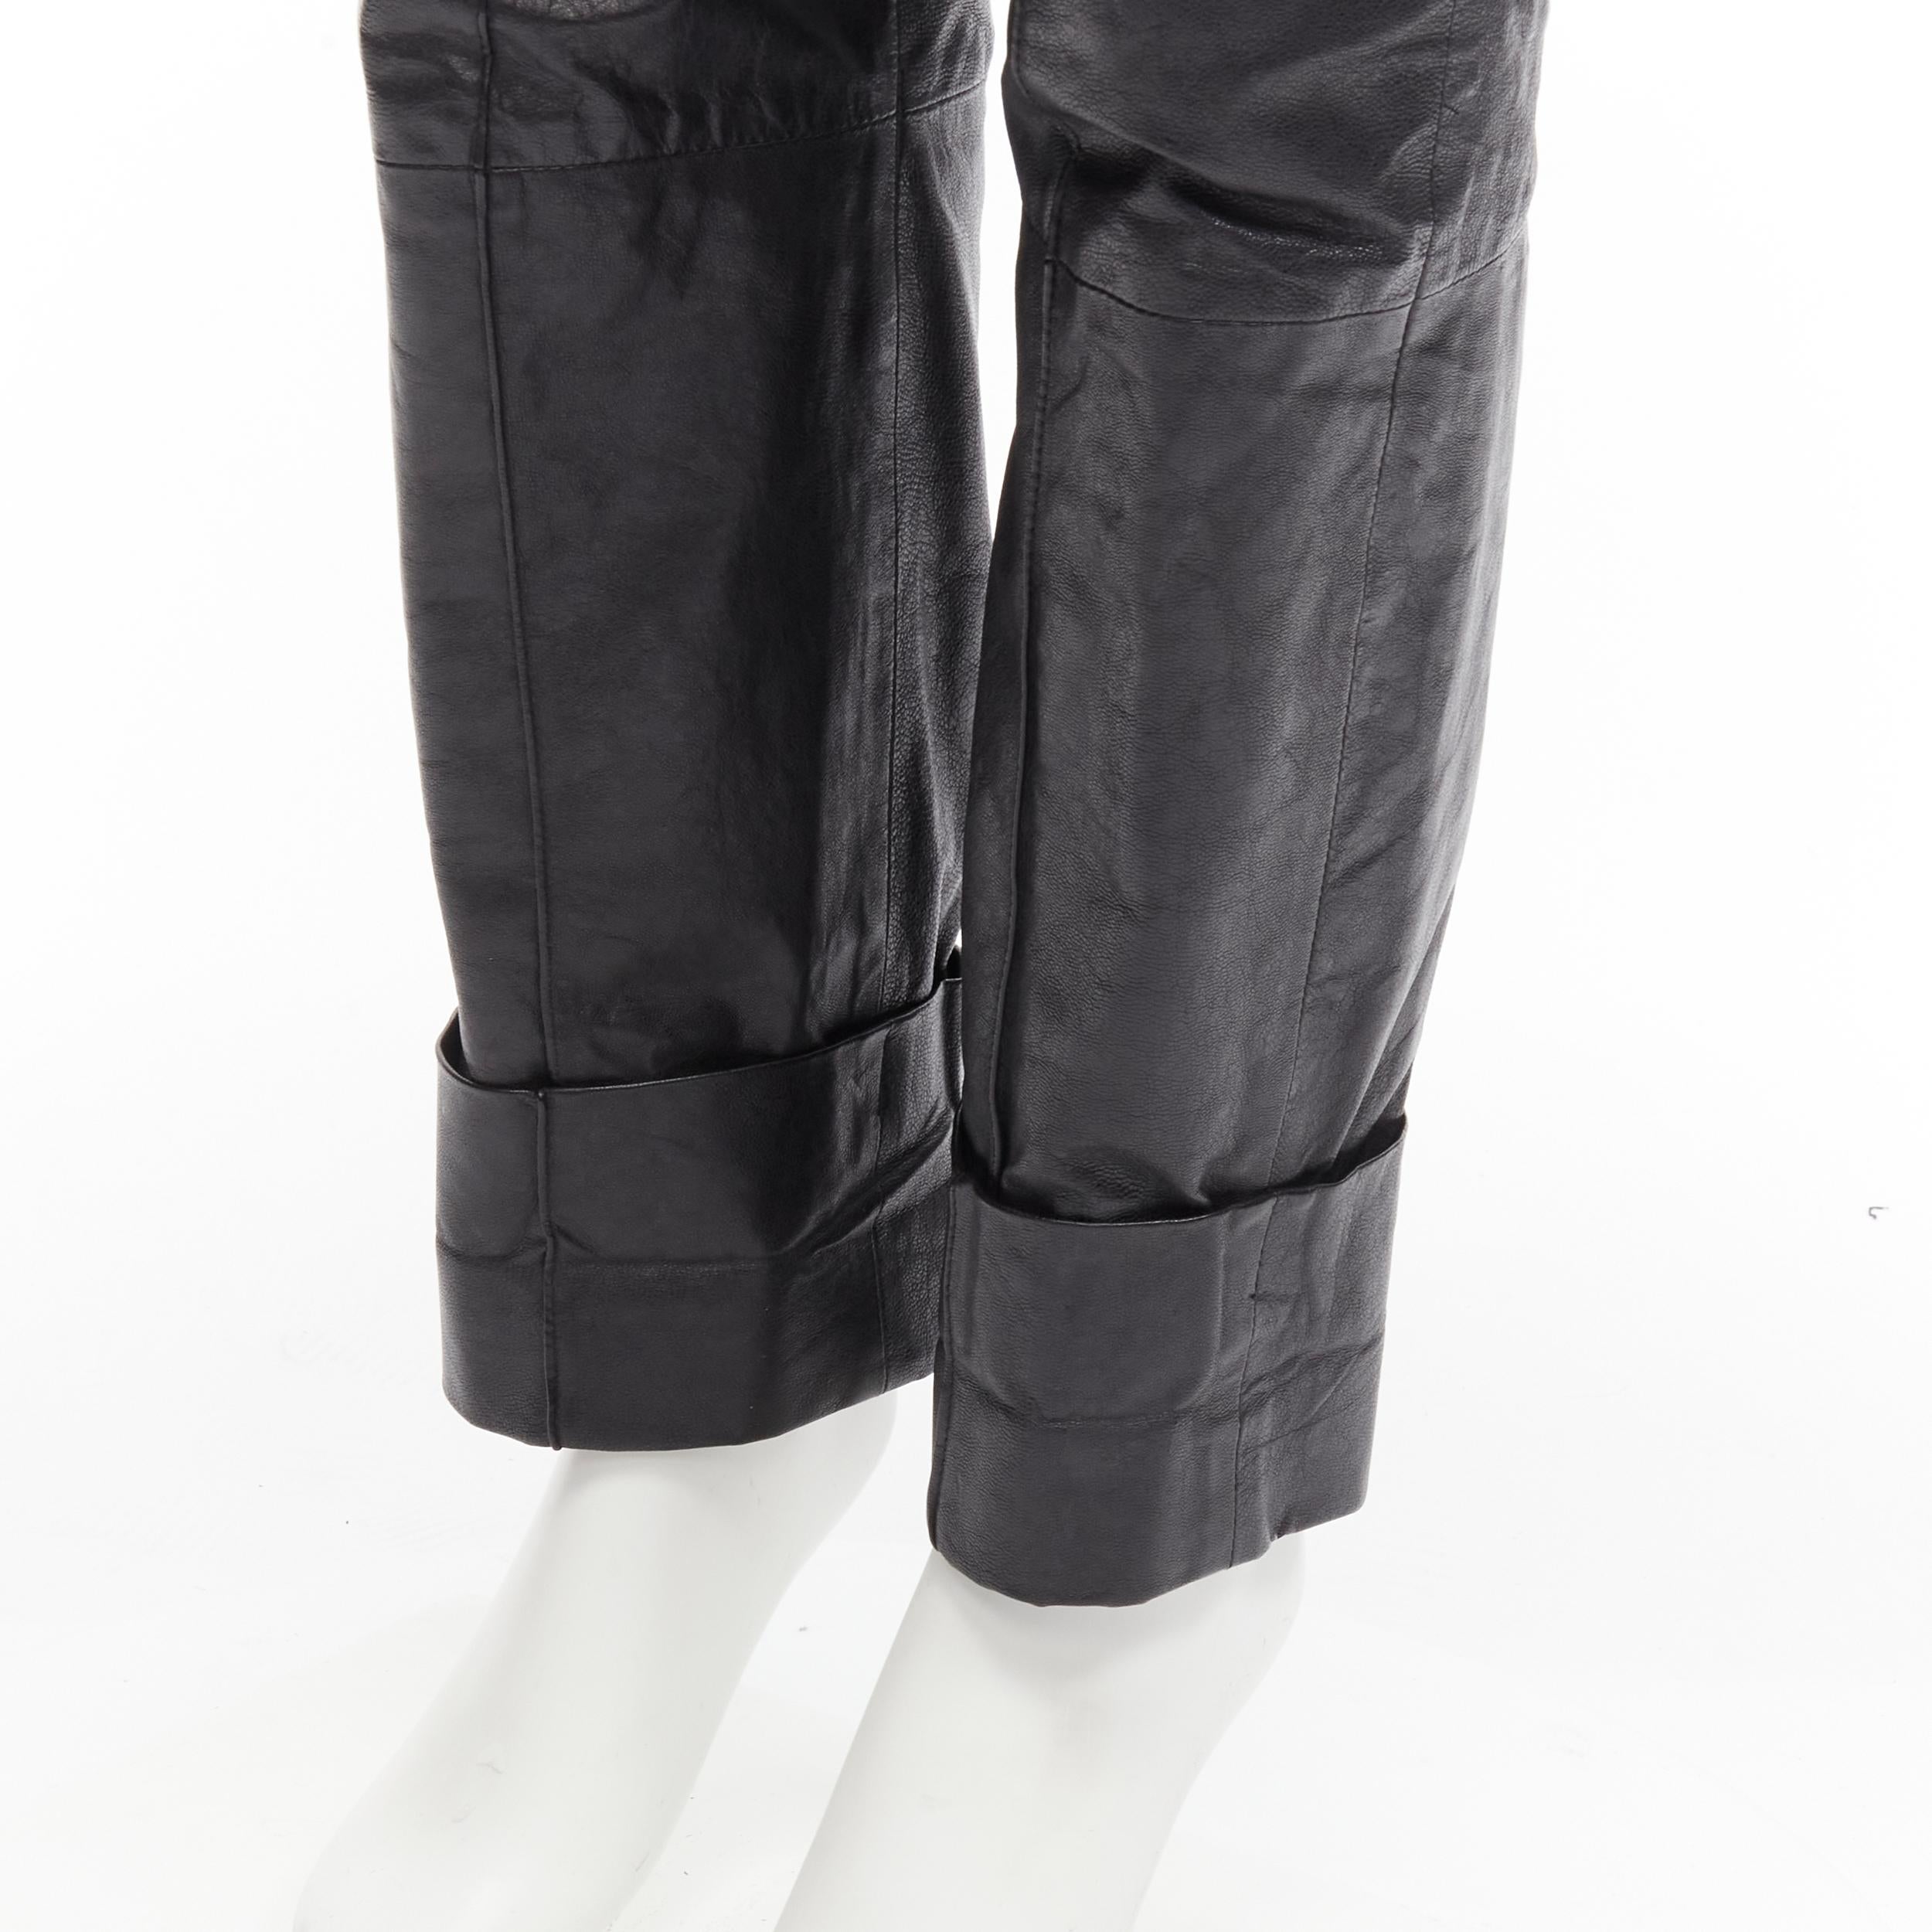 HAIDER ACKERMANN glossy leather low waist dropped crotch cuffed pants FR36 S
Reference: CNLE/A00184
Brand: Haider Ackermann
Designer: Haider Ackermann
Material: Leather
Color: Black
Pattern: Solid
Closure: Zip Fly
Lining: Fabric
Extra Details: Two